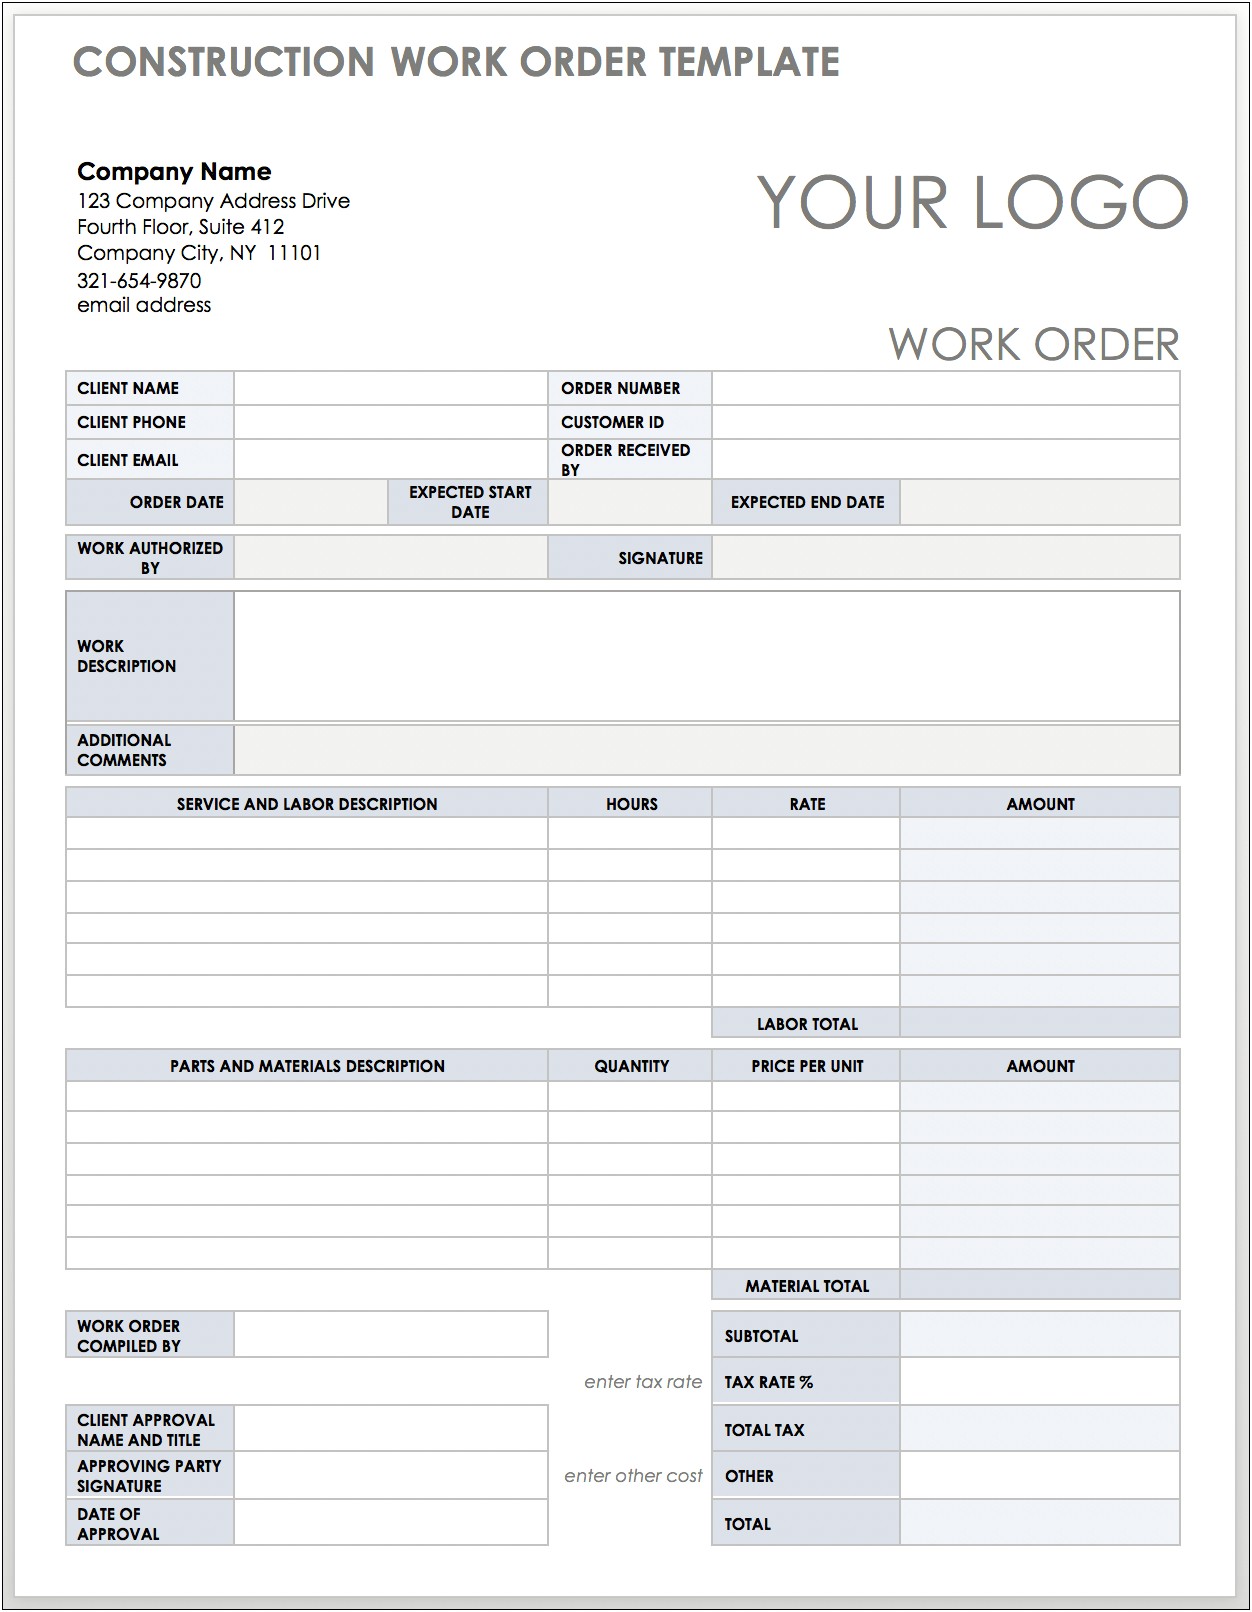 Construction Work Order Template Pdf Free